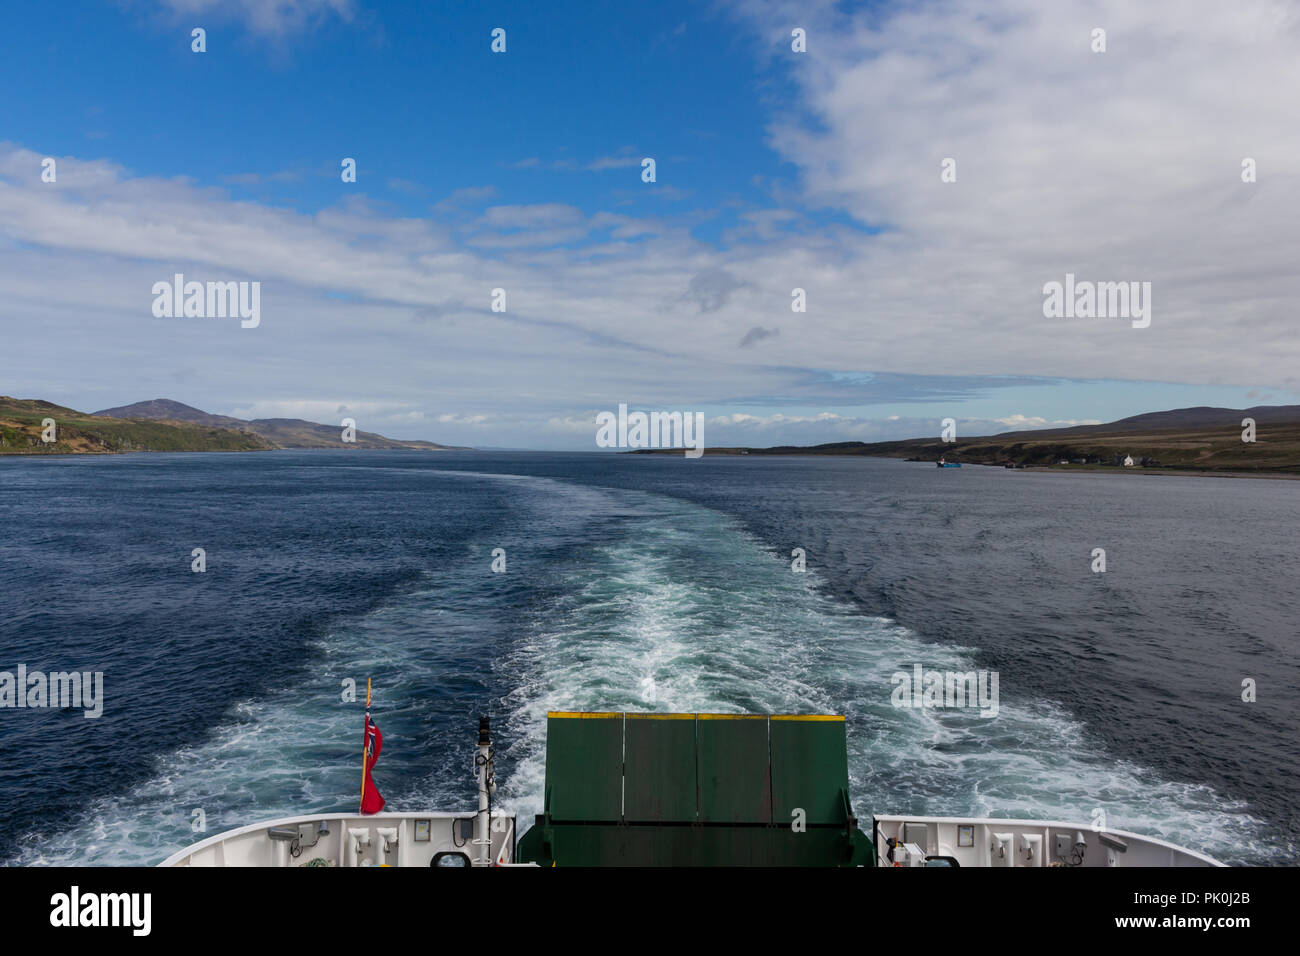 Wake of a boat travelling through the sea between Scottish Islands. Stock Photo